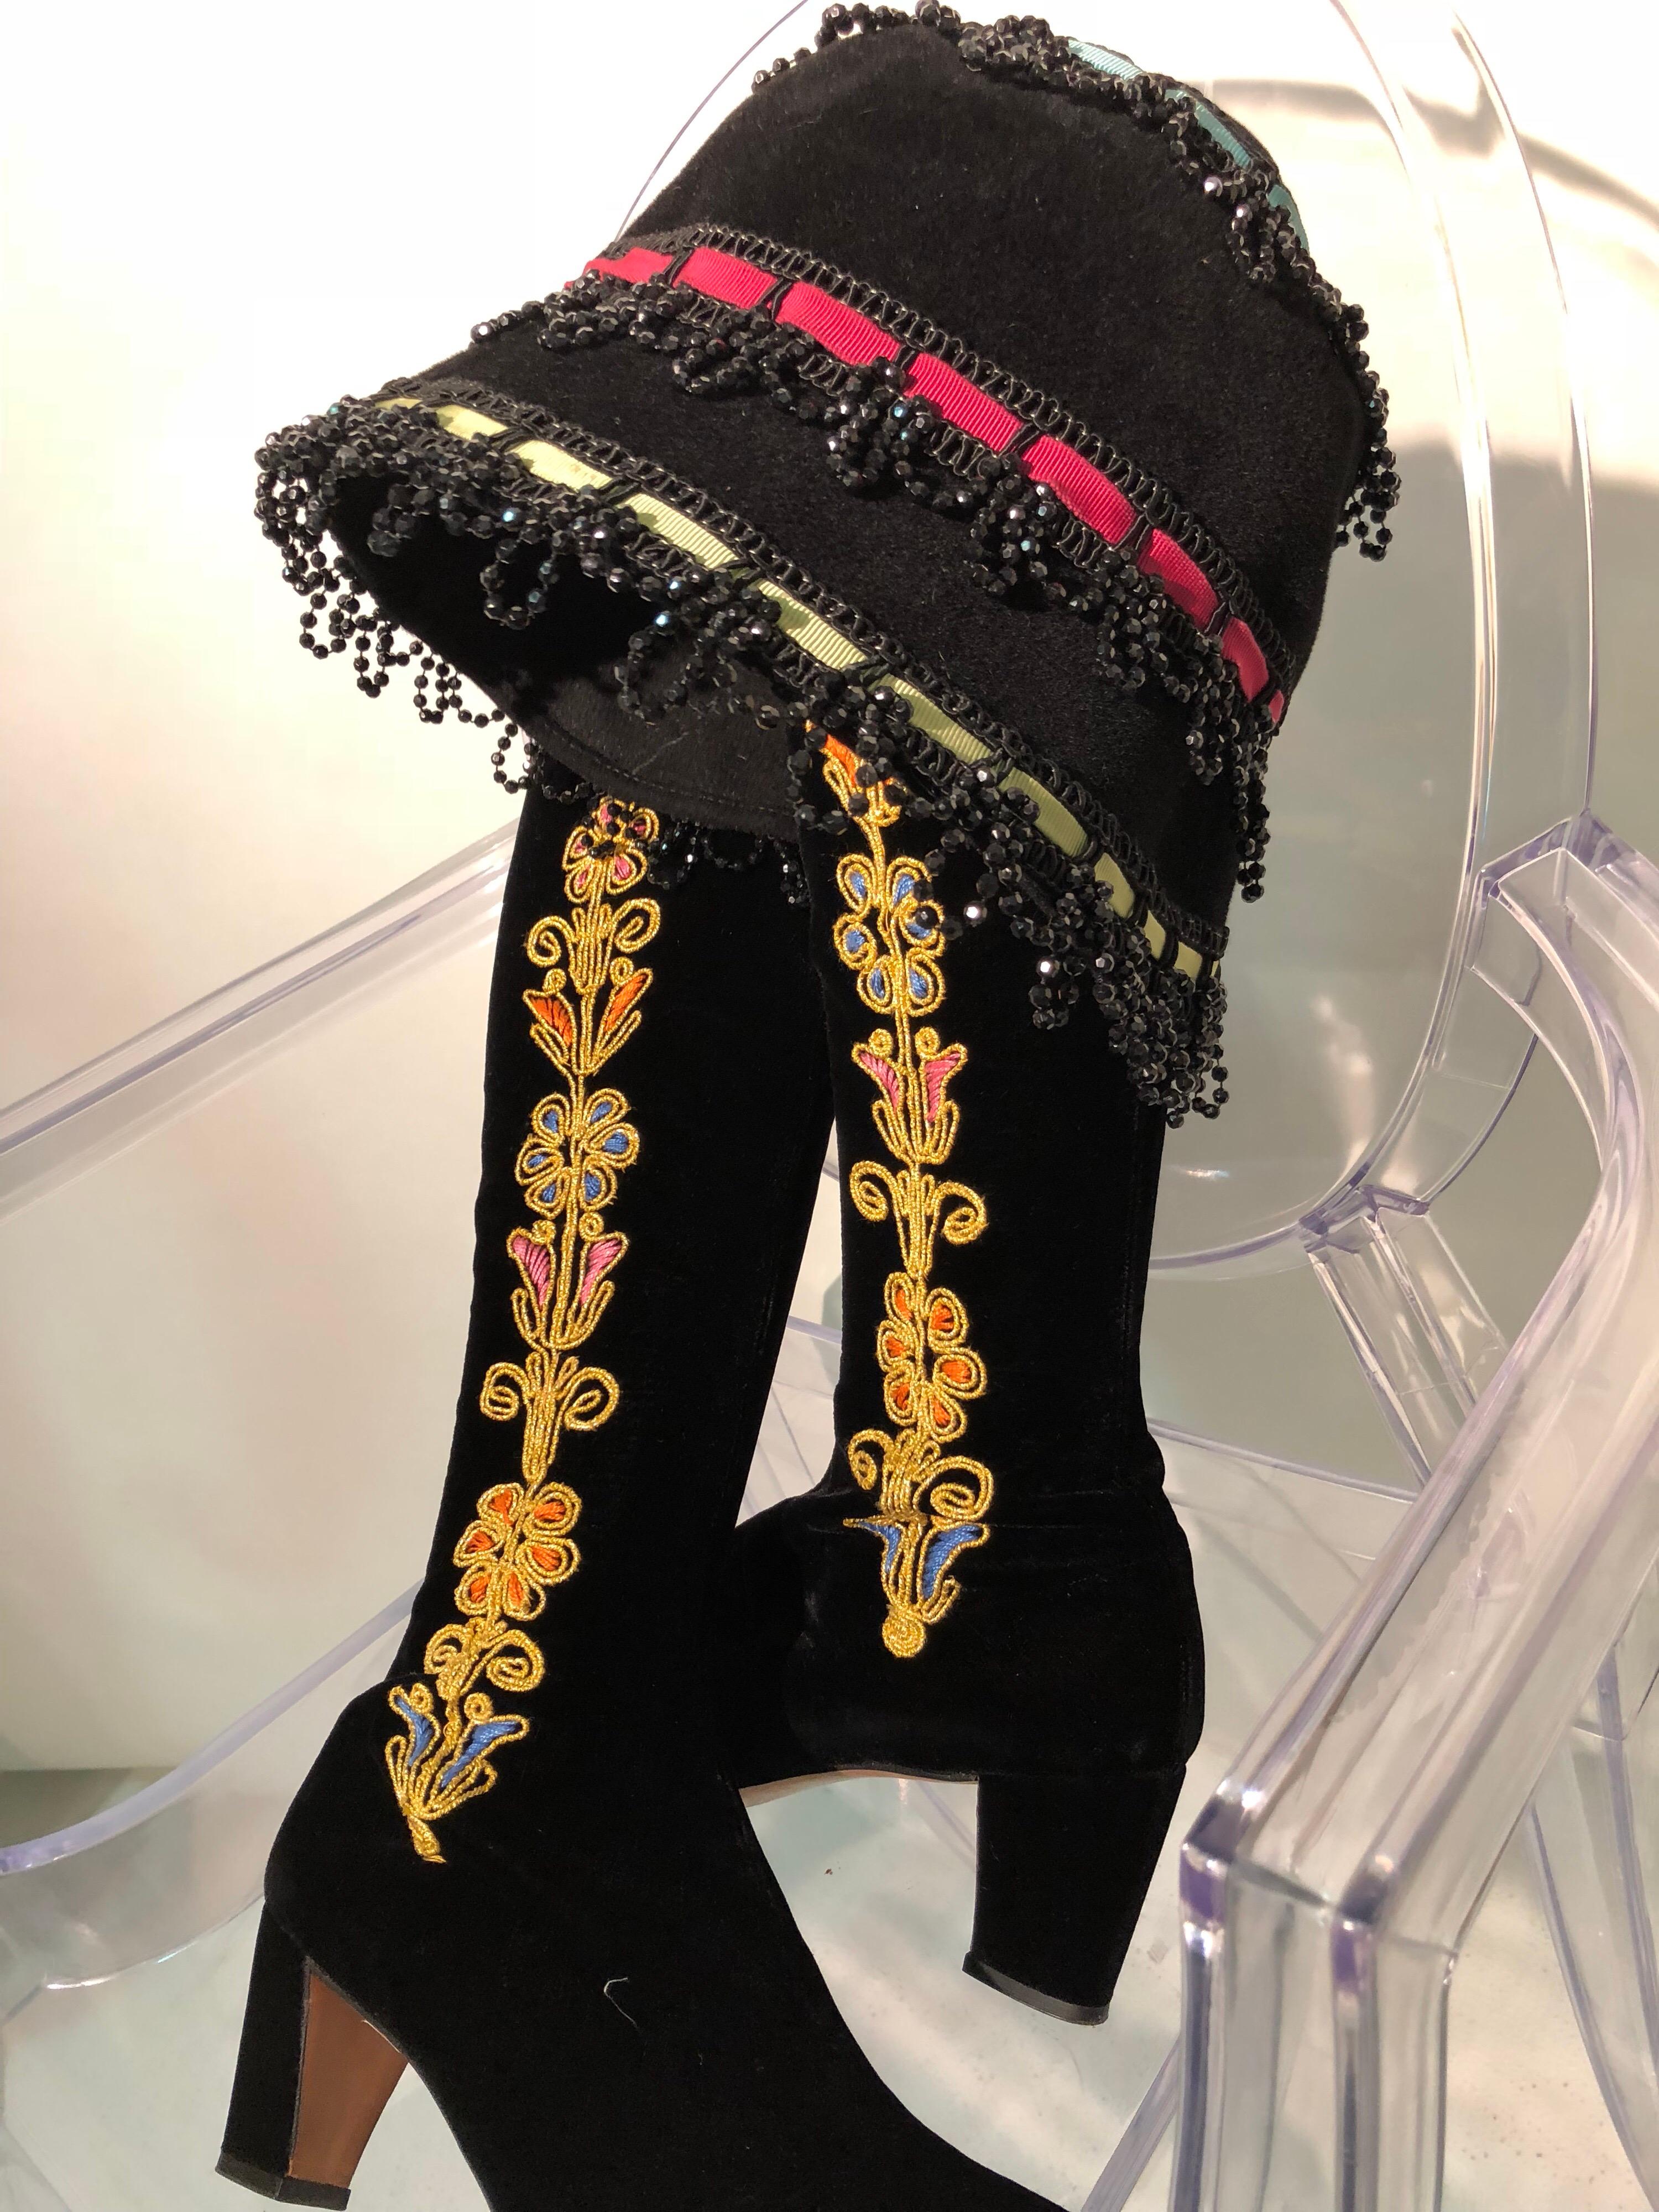 Women's Black Velvet Knee-High Boots With Romantic Floral Cord Embroidery, 1960s  